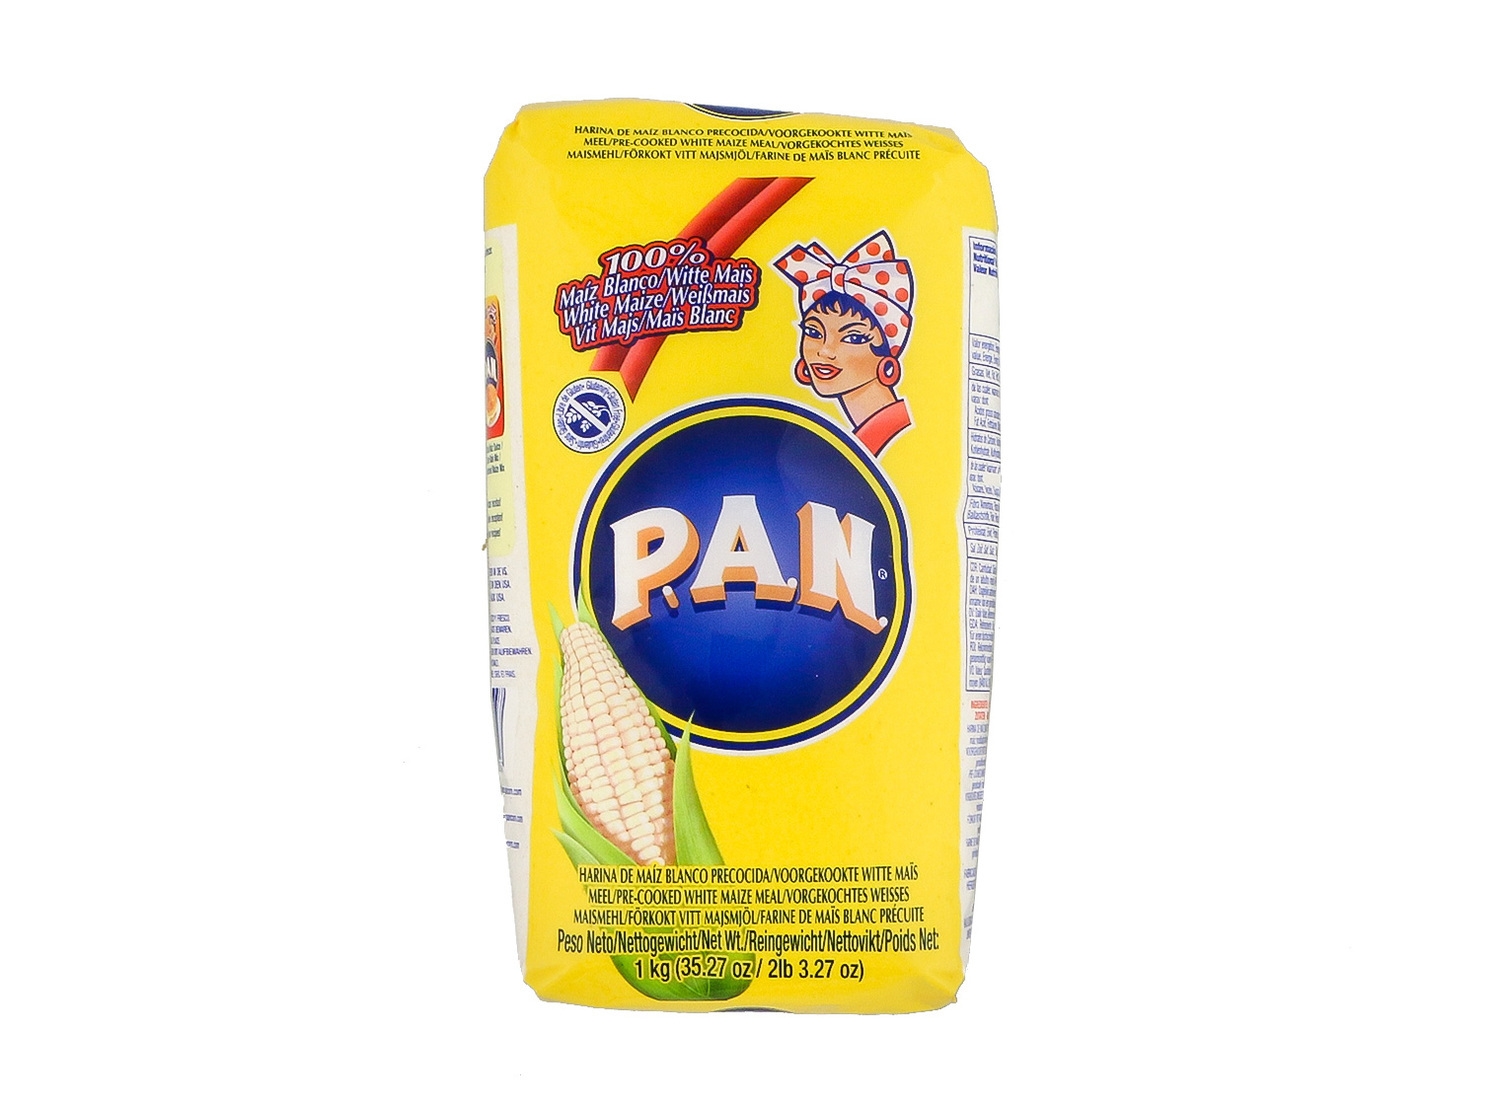 P.A.N. Pre-cooked white maize meal